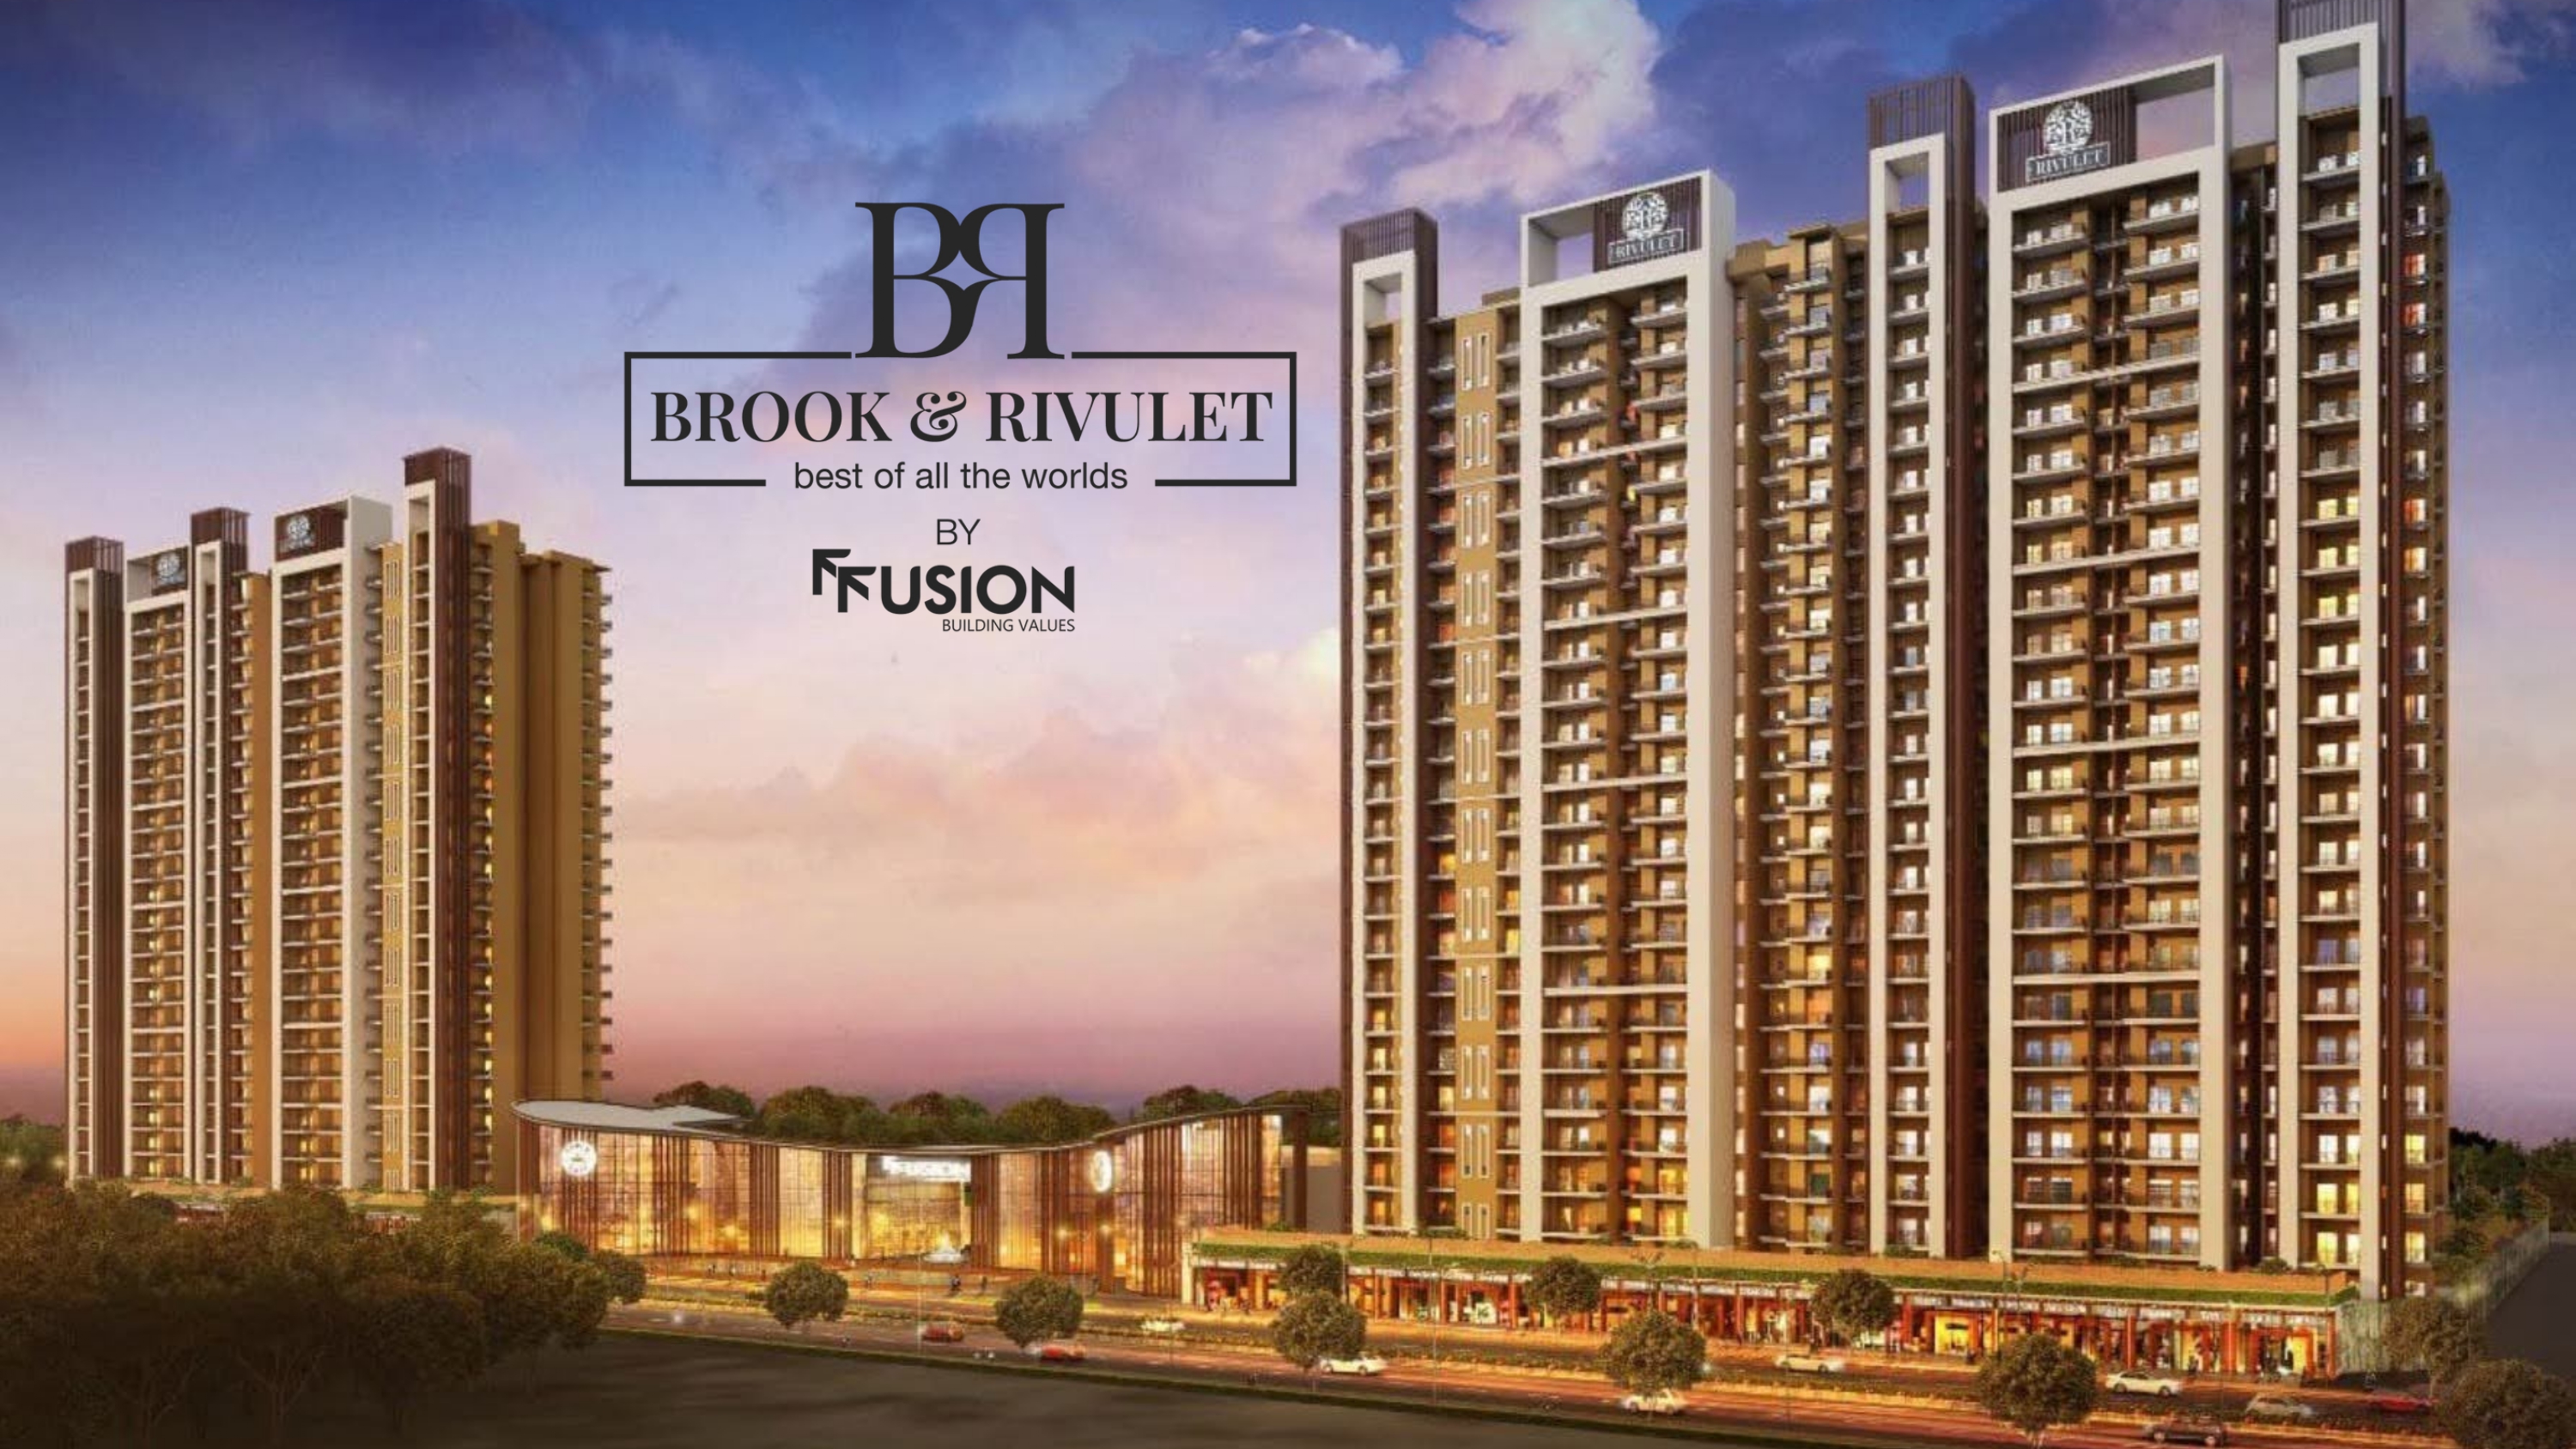 2/3/4 BHK Flats for Sale in Delhi NCR